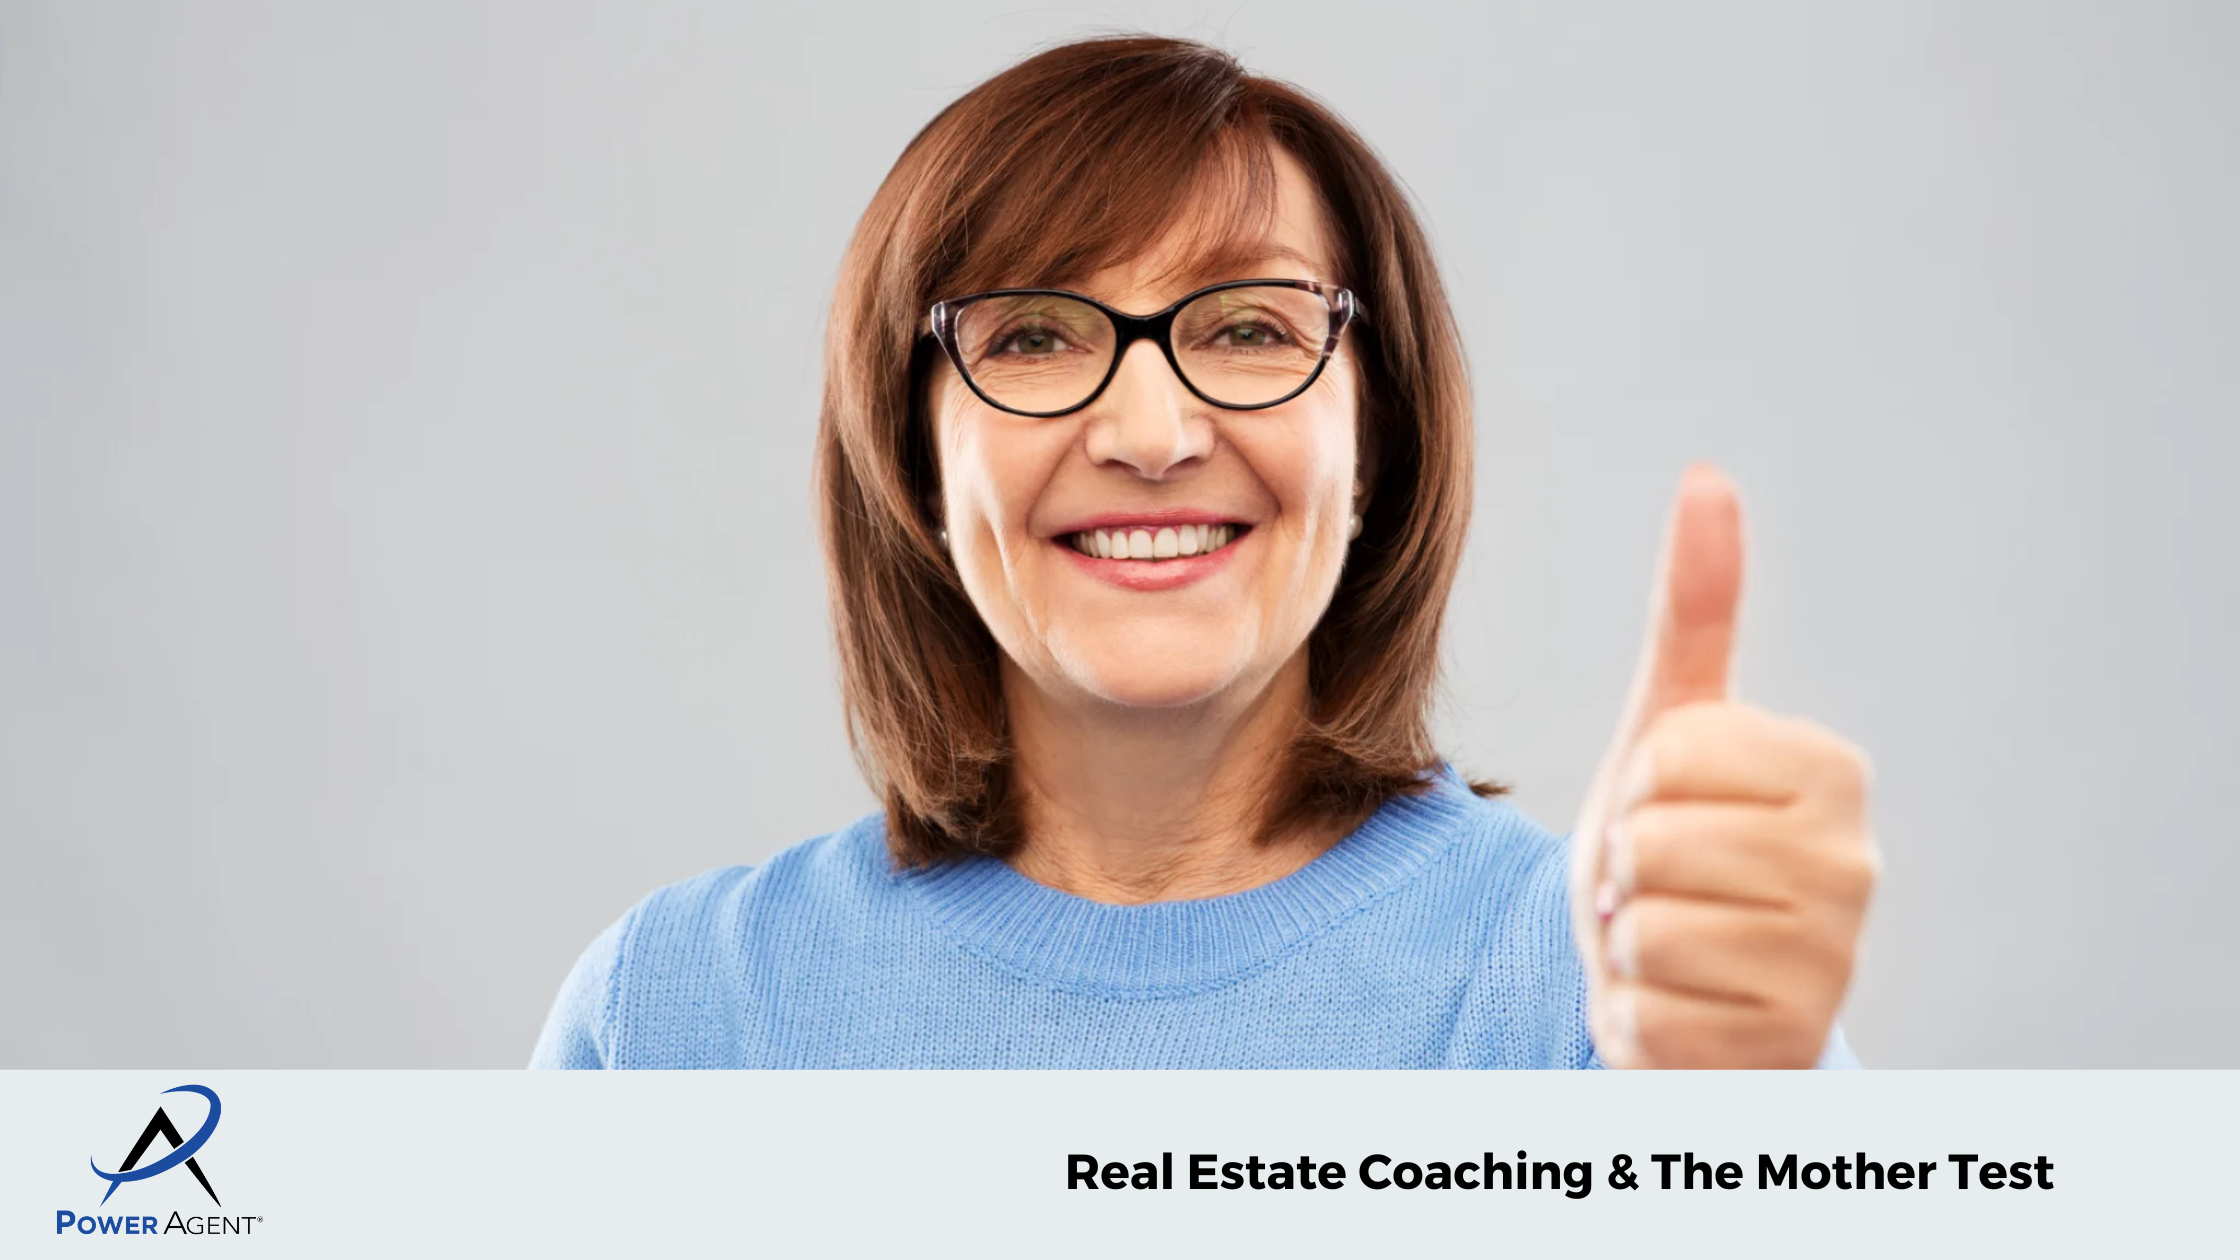 Real Estate Coaching & The Mother Test